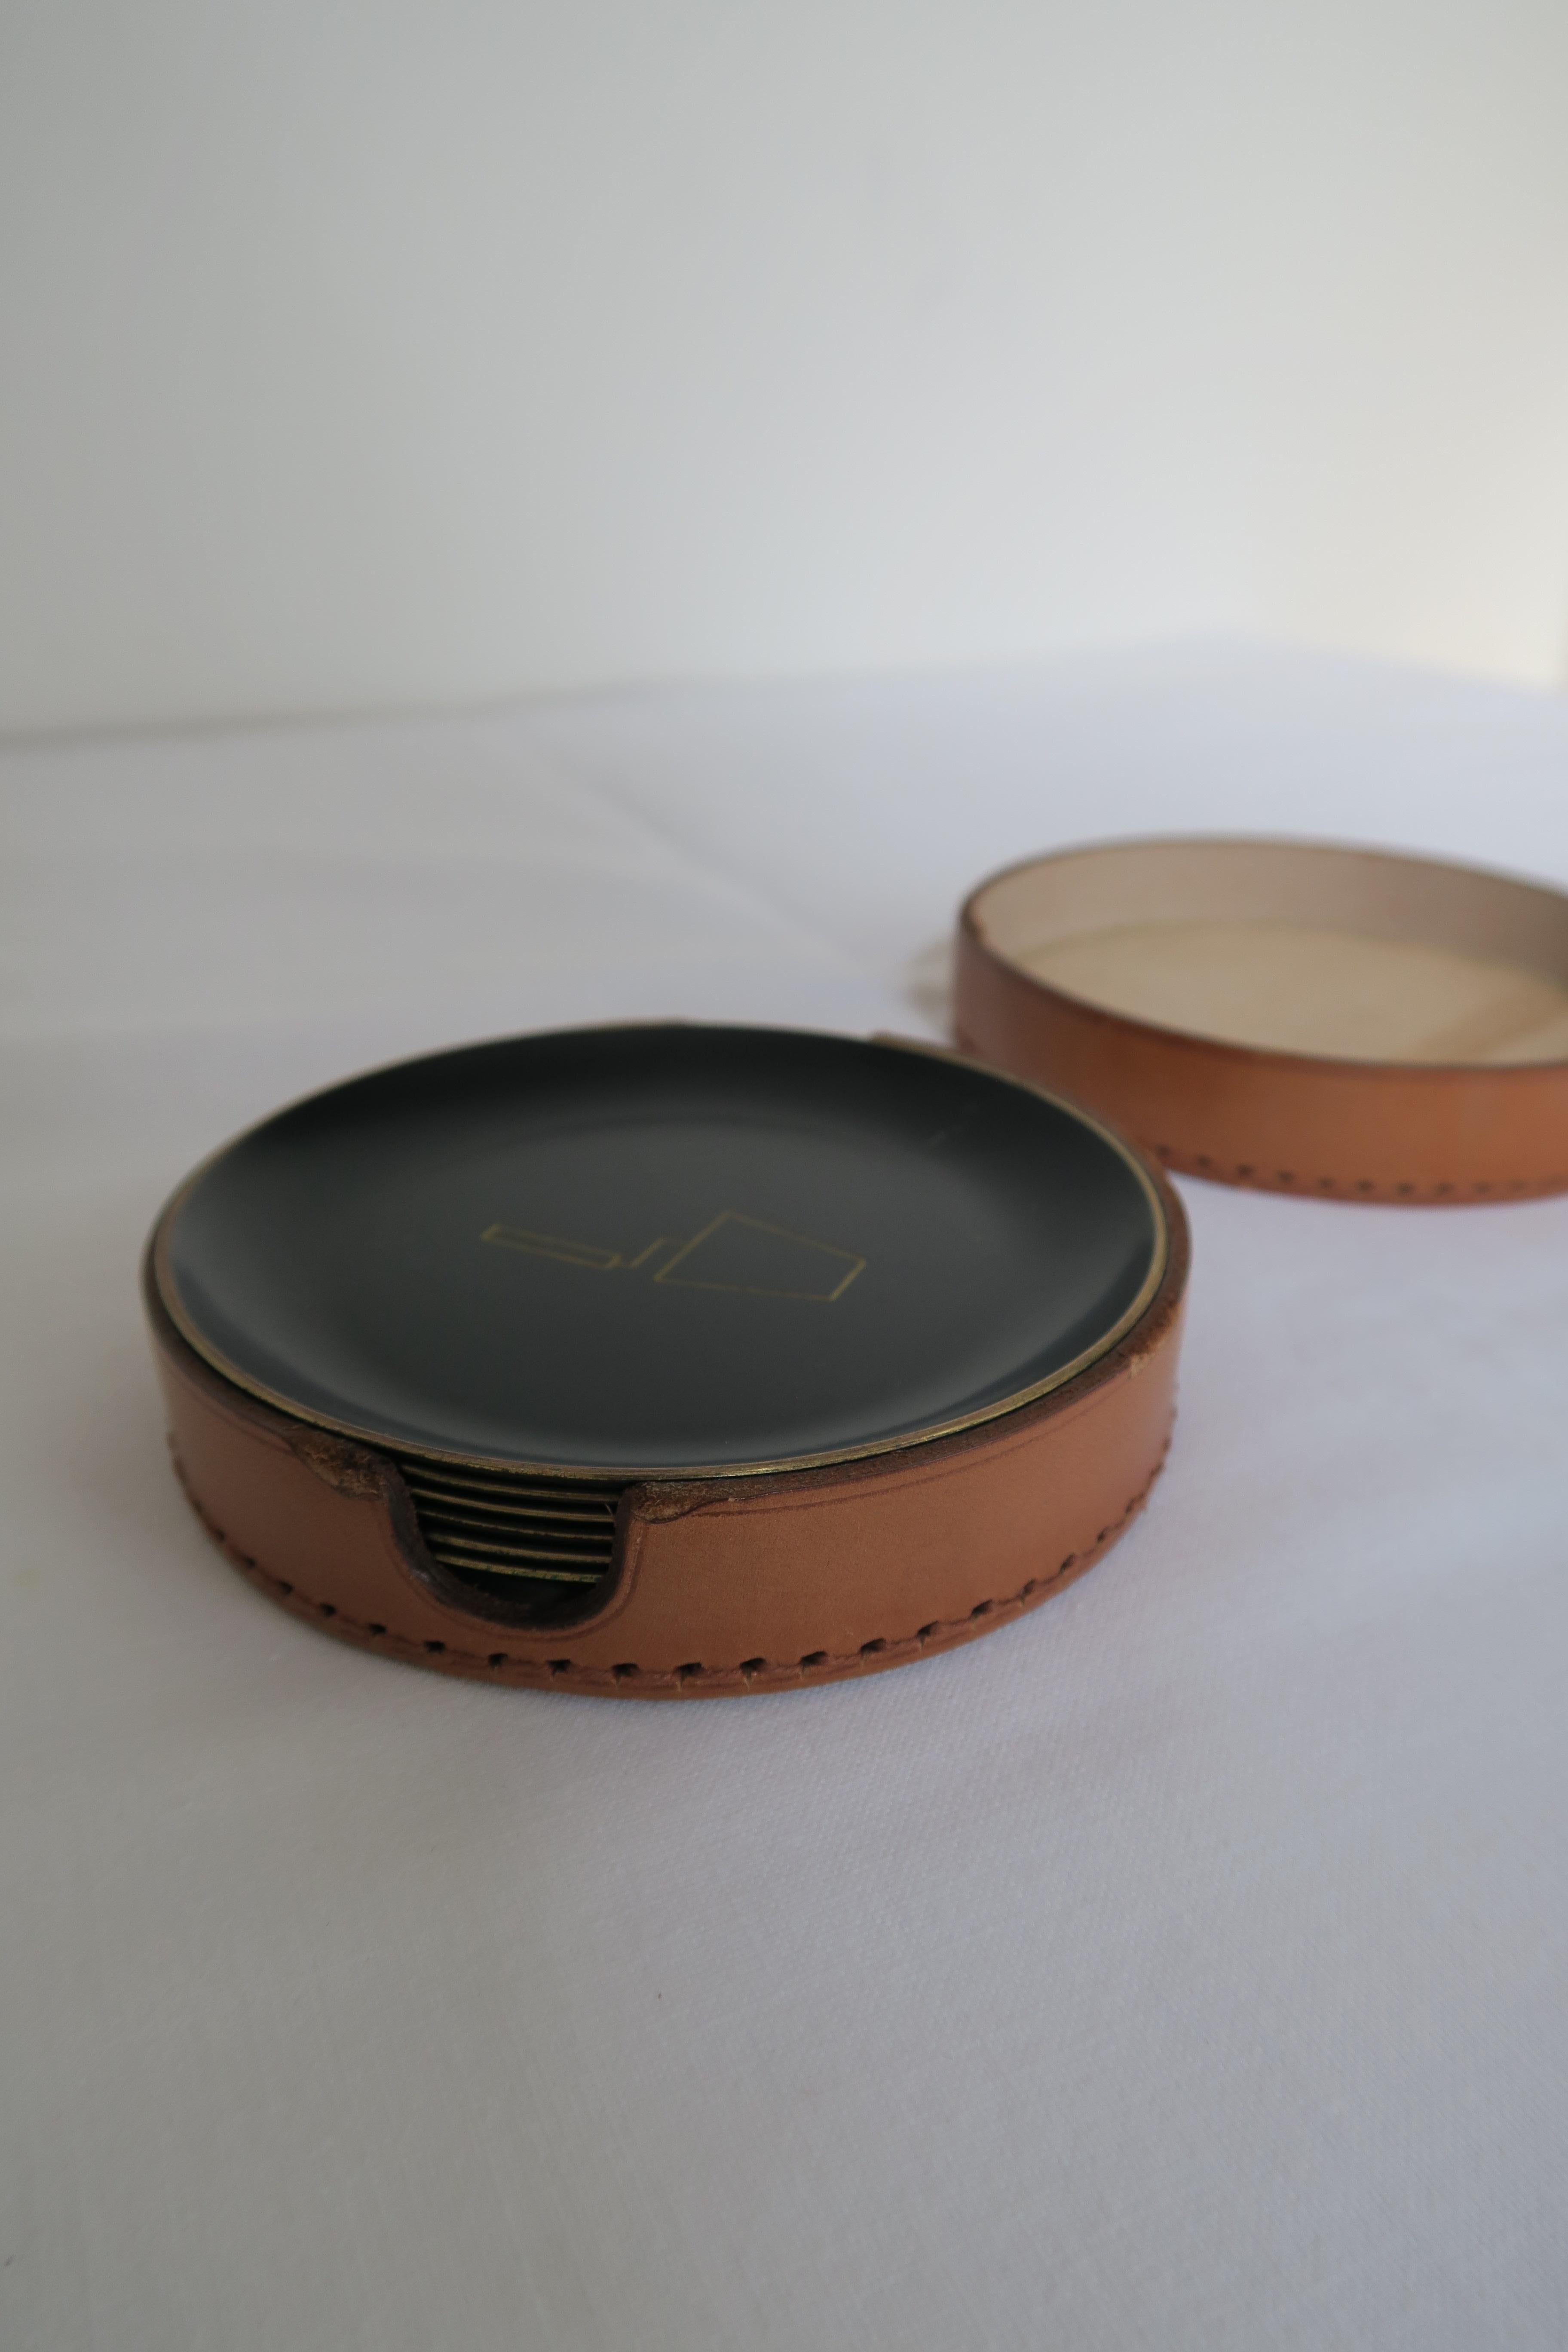 Original set of 6 coasters attributed to Austrian Bauhaus designer Carl Auböck. The coasters are made from brass and feature freemasons motives. They come with a nice and sturdy circular leather case.
Everything is in nice condition, without